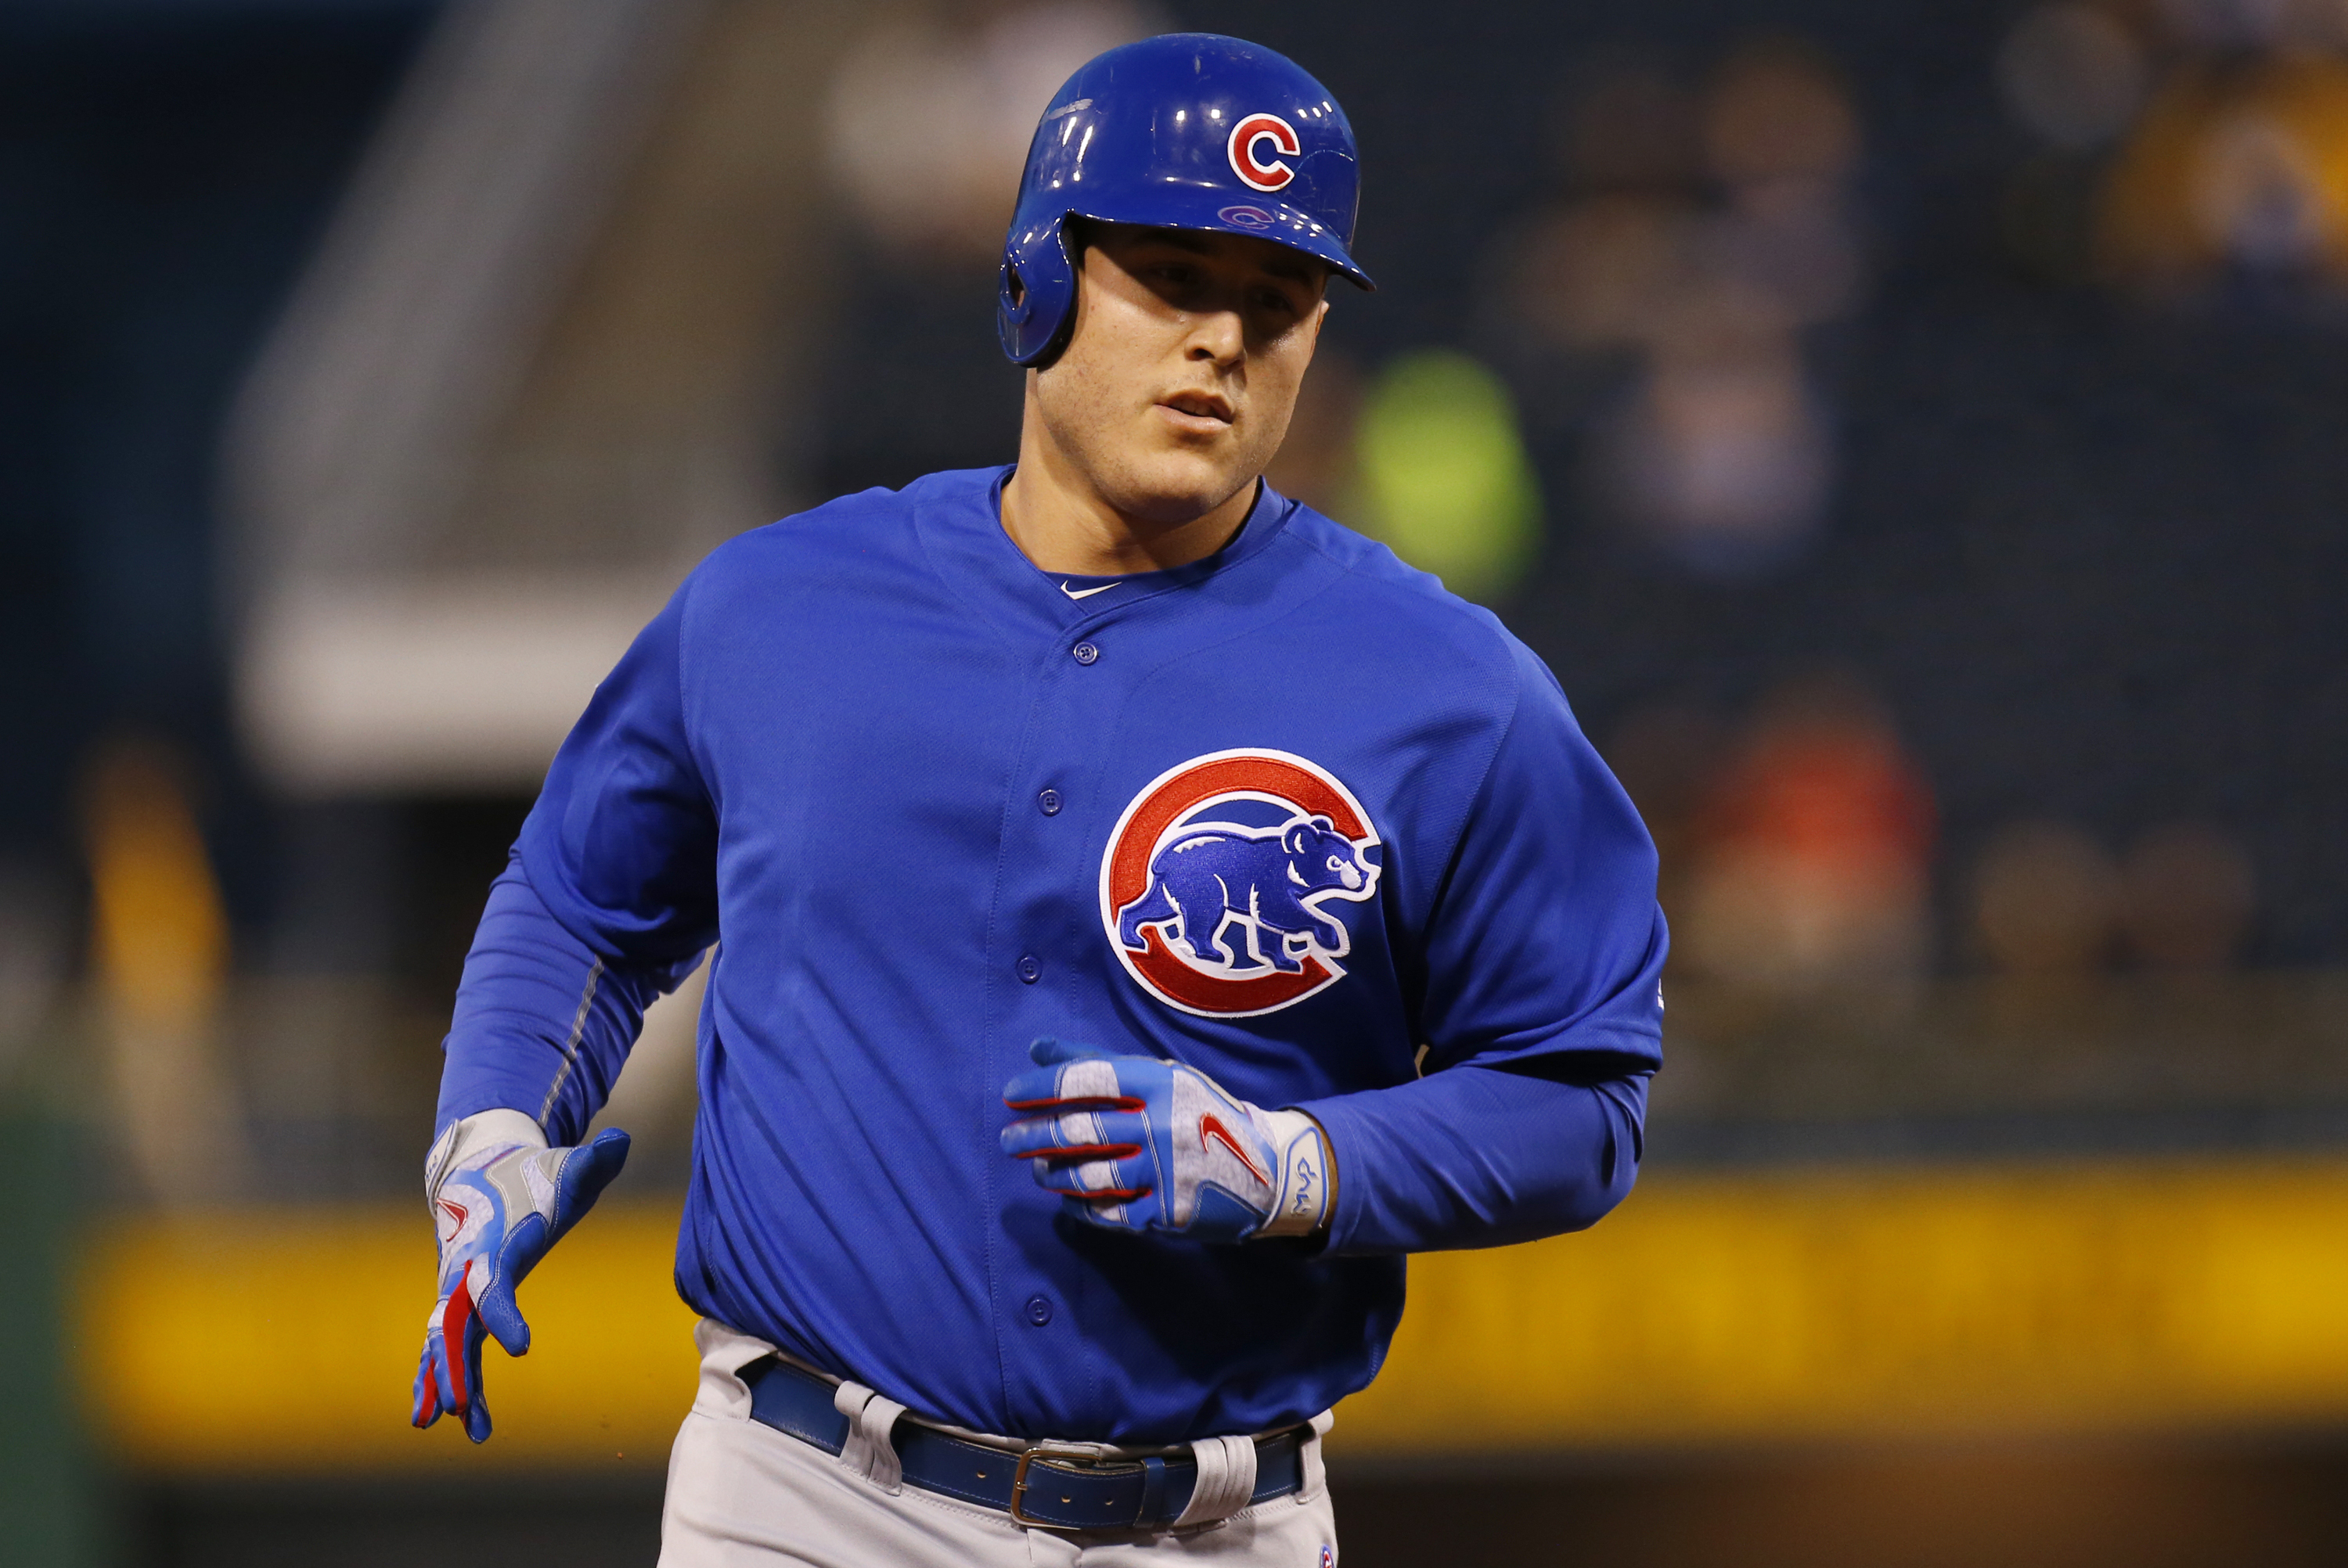 Ex-Cubs 1B Anthony Rizzo: 'No regrets' over declining extension